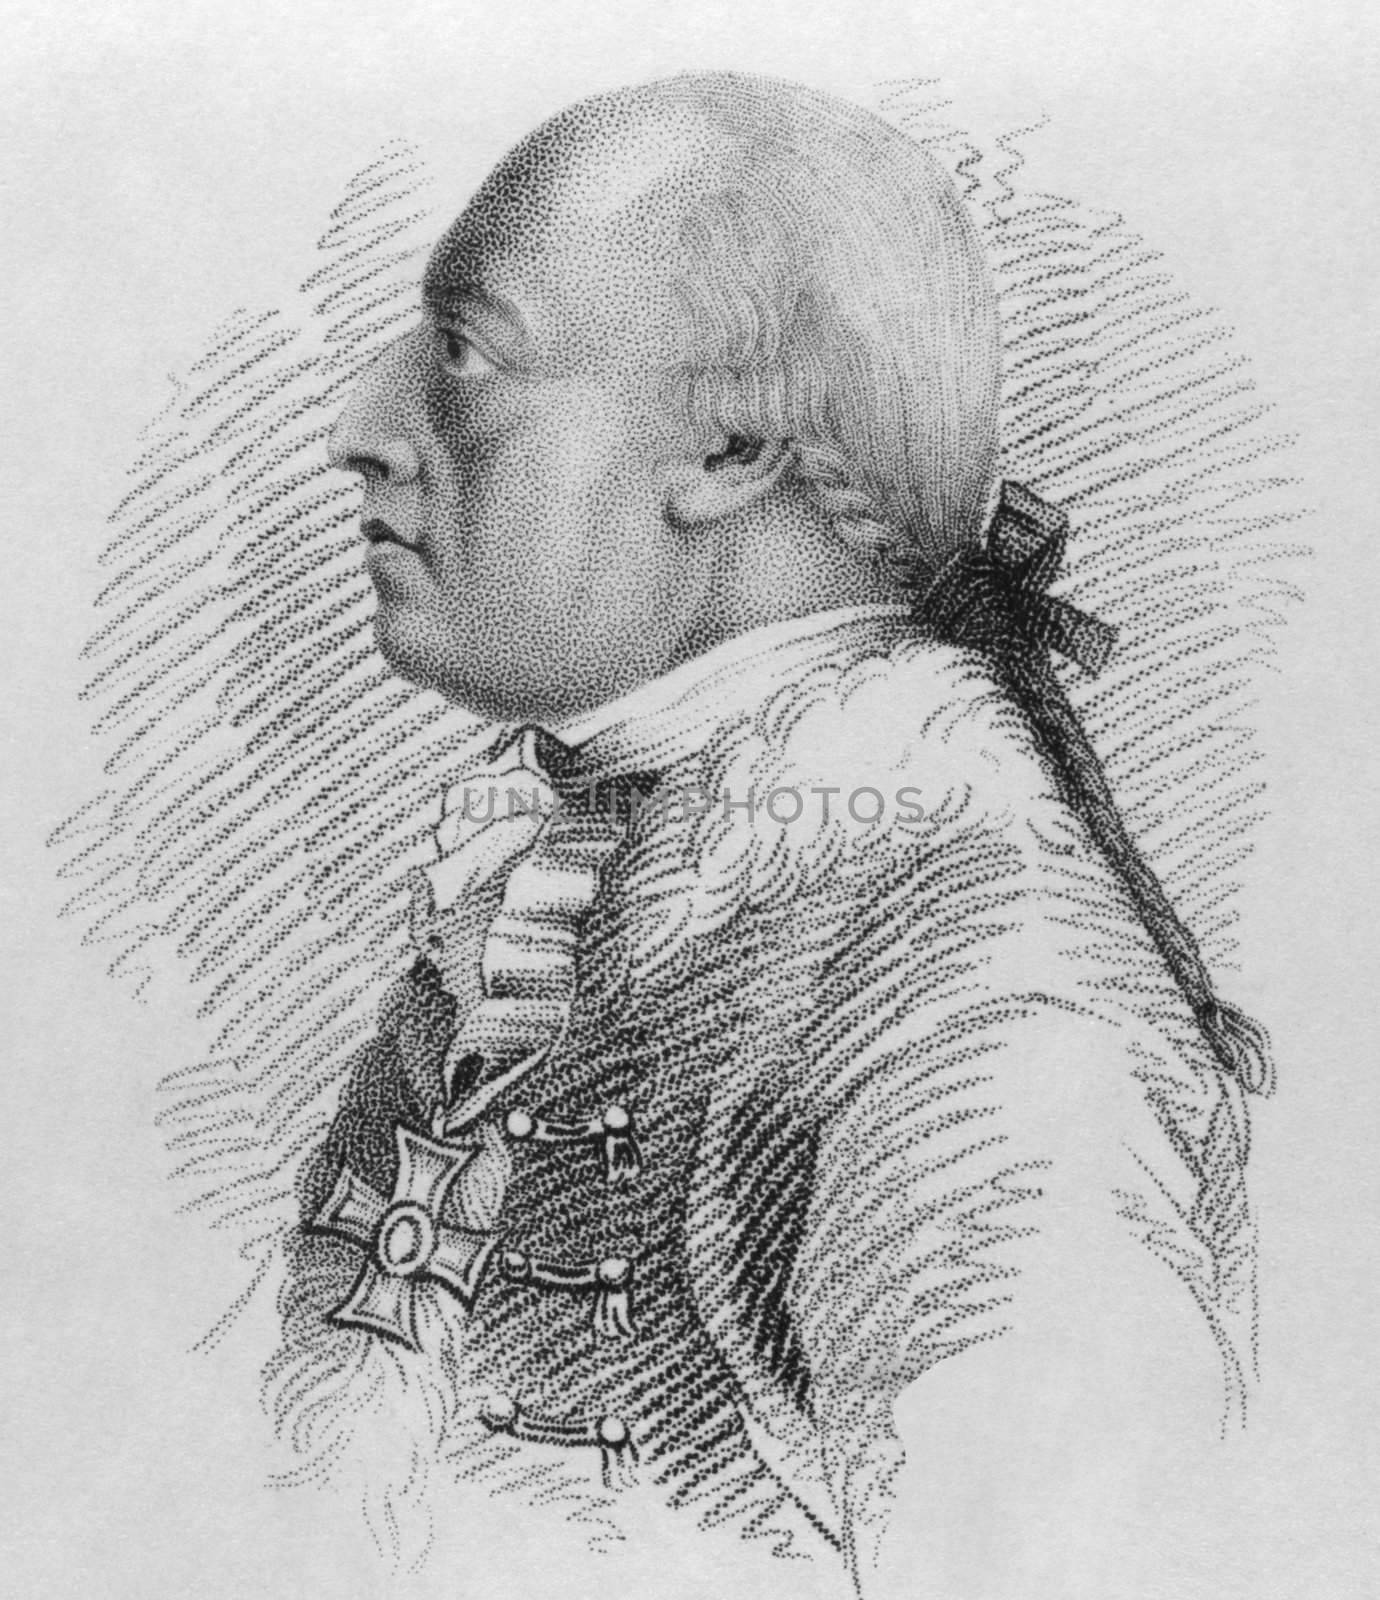 Dagobert Sigmund von Wurmser (1724-1797) on engraving from the 1800s. Austrian field marshal during the French Revolutionary Wars. Mostly remembered for his unsuccessful operations against Napoleon Bonaparte during the 1796 campaign in Italy. Published in London by Jones in 1807.